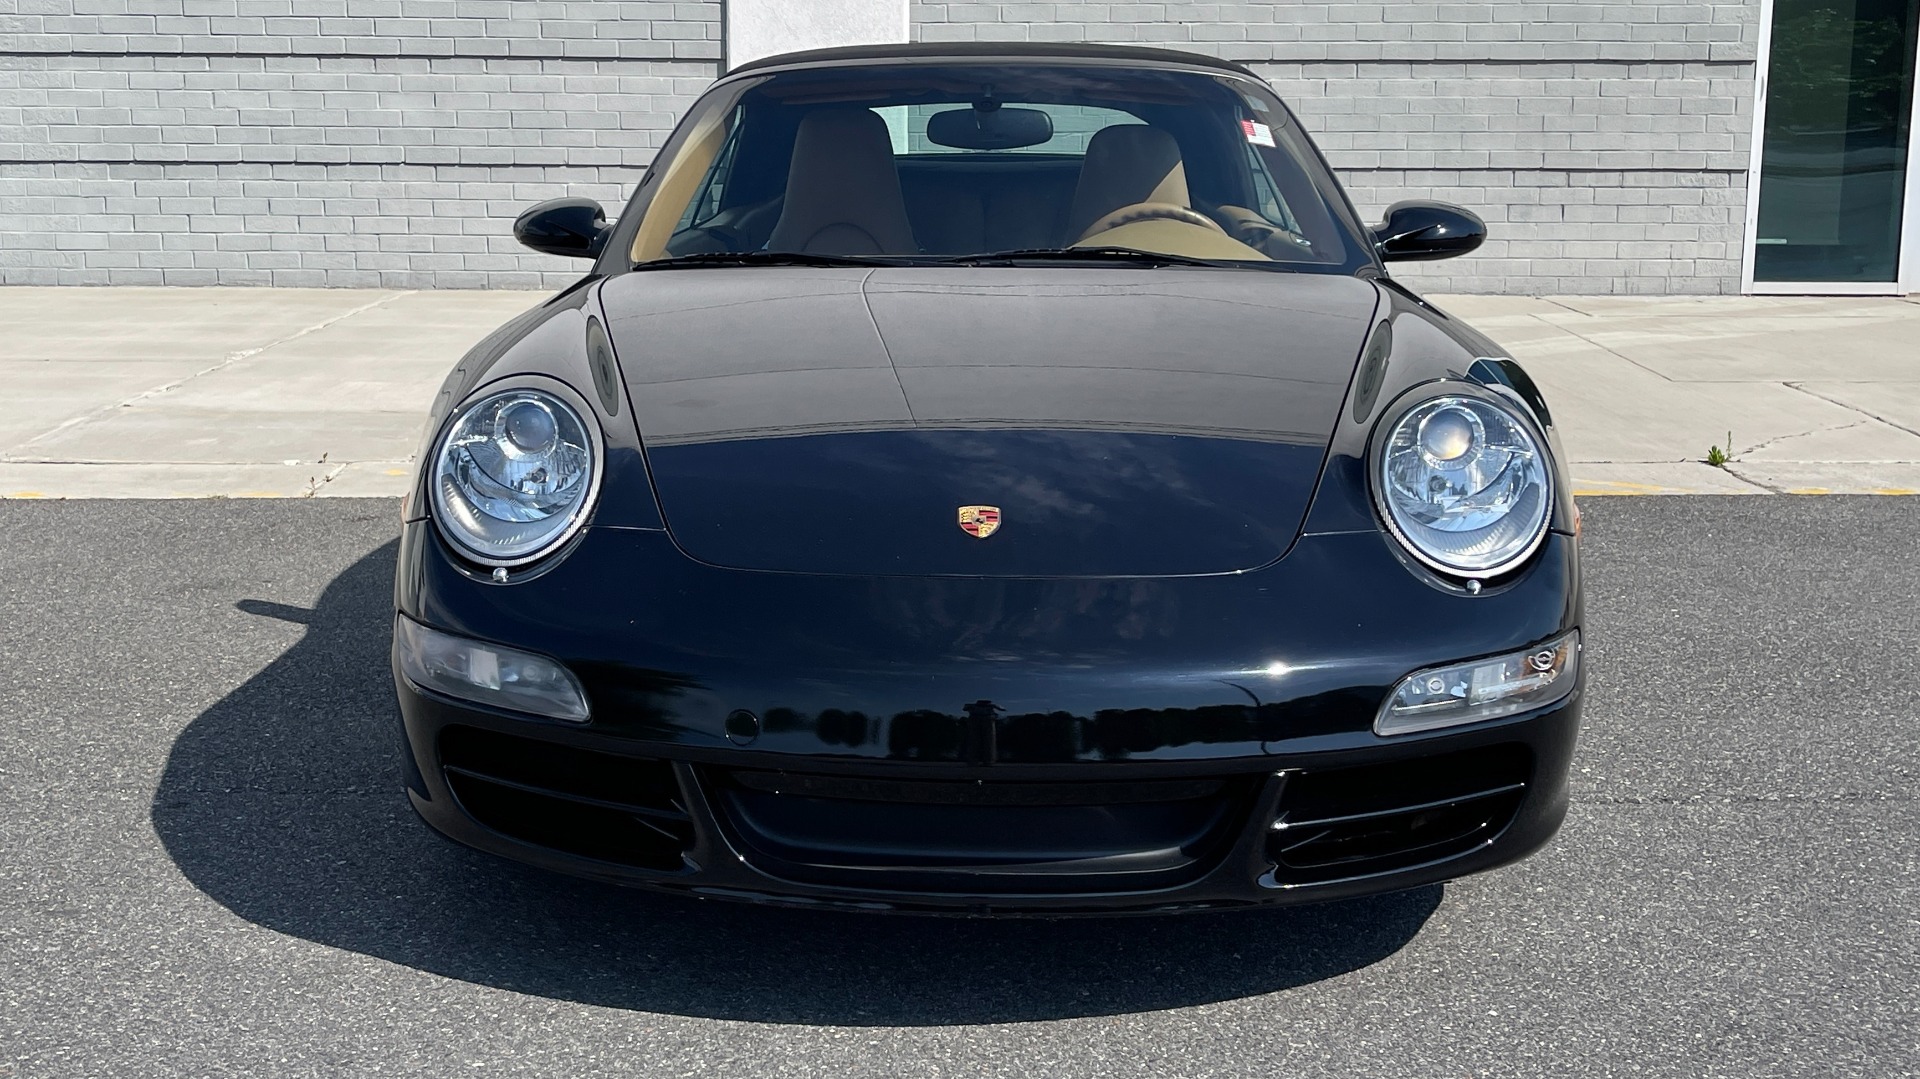 Used 2006 Porsche 911 CARRERA S CABRIOLET / BOSE / CD CHANGER / PWR SEAT PKG / HTD STS for sale $56,400 at Formula Imports in Charlotte NC 28227 25